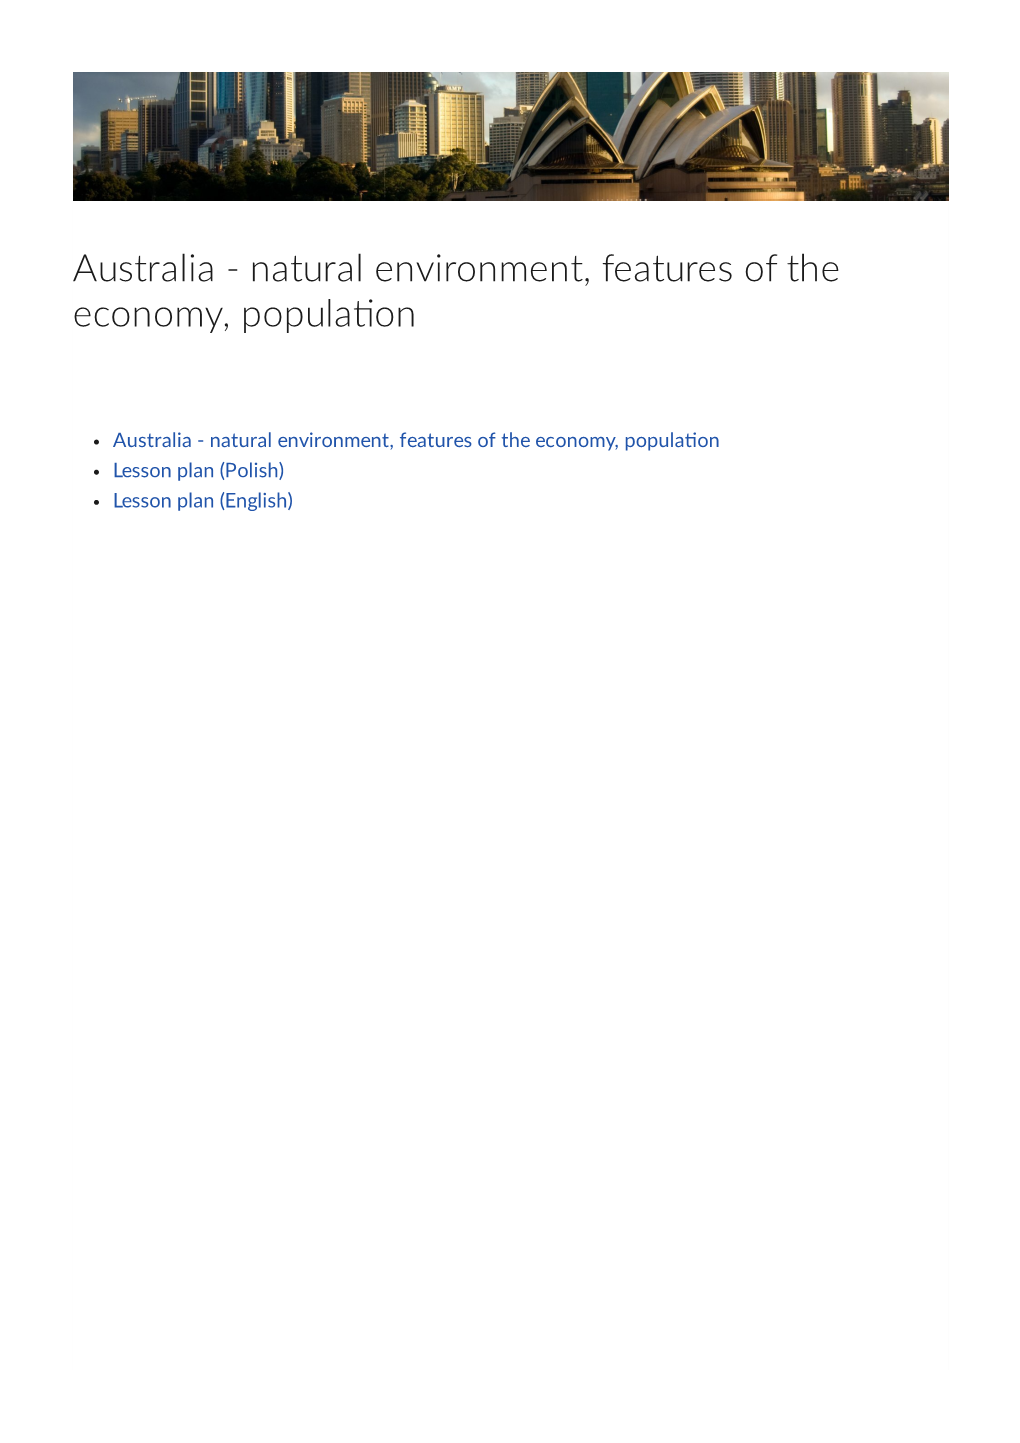 Australia - Natural Environment, Features of the Economy, Popula�On